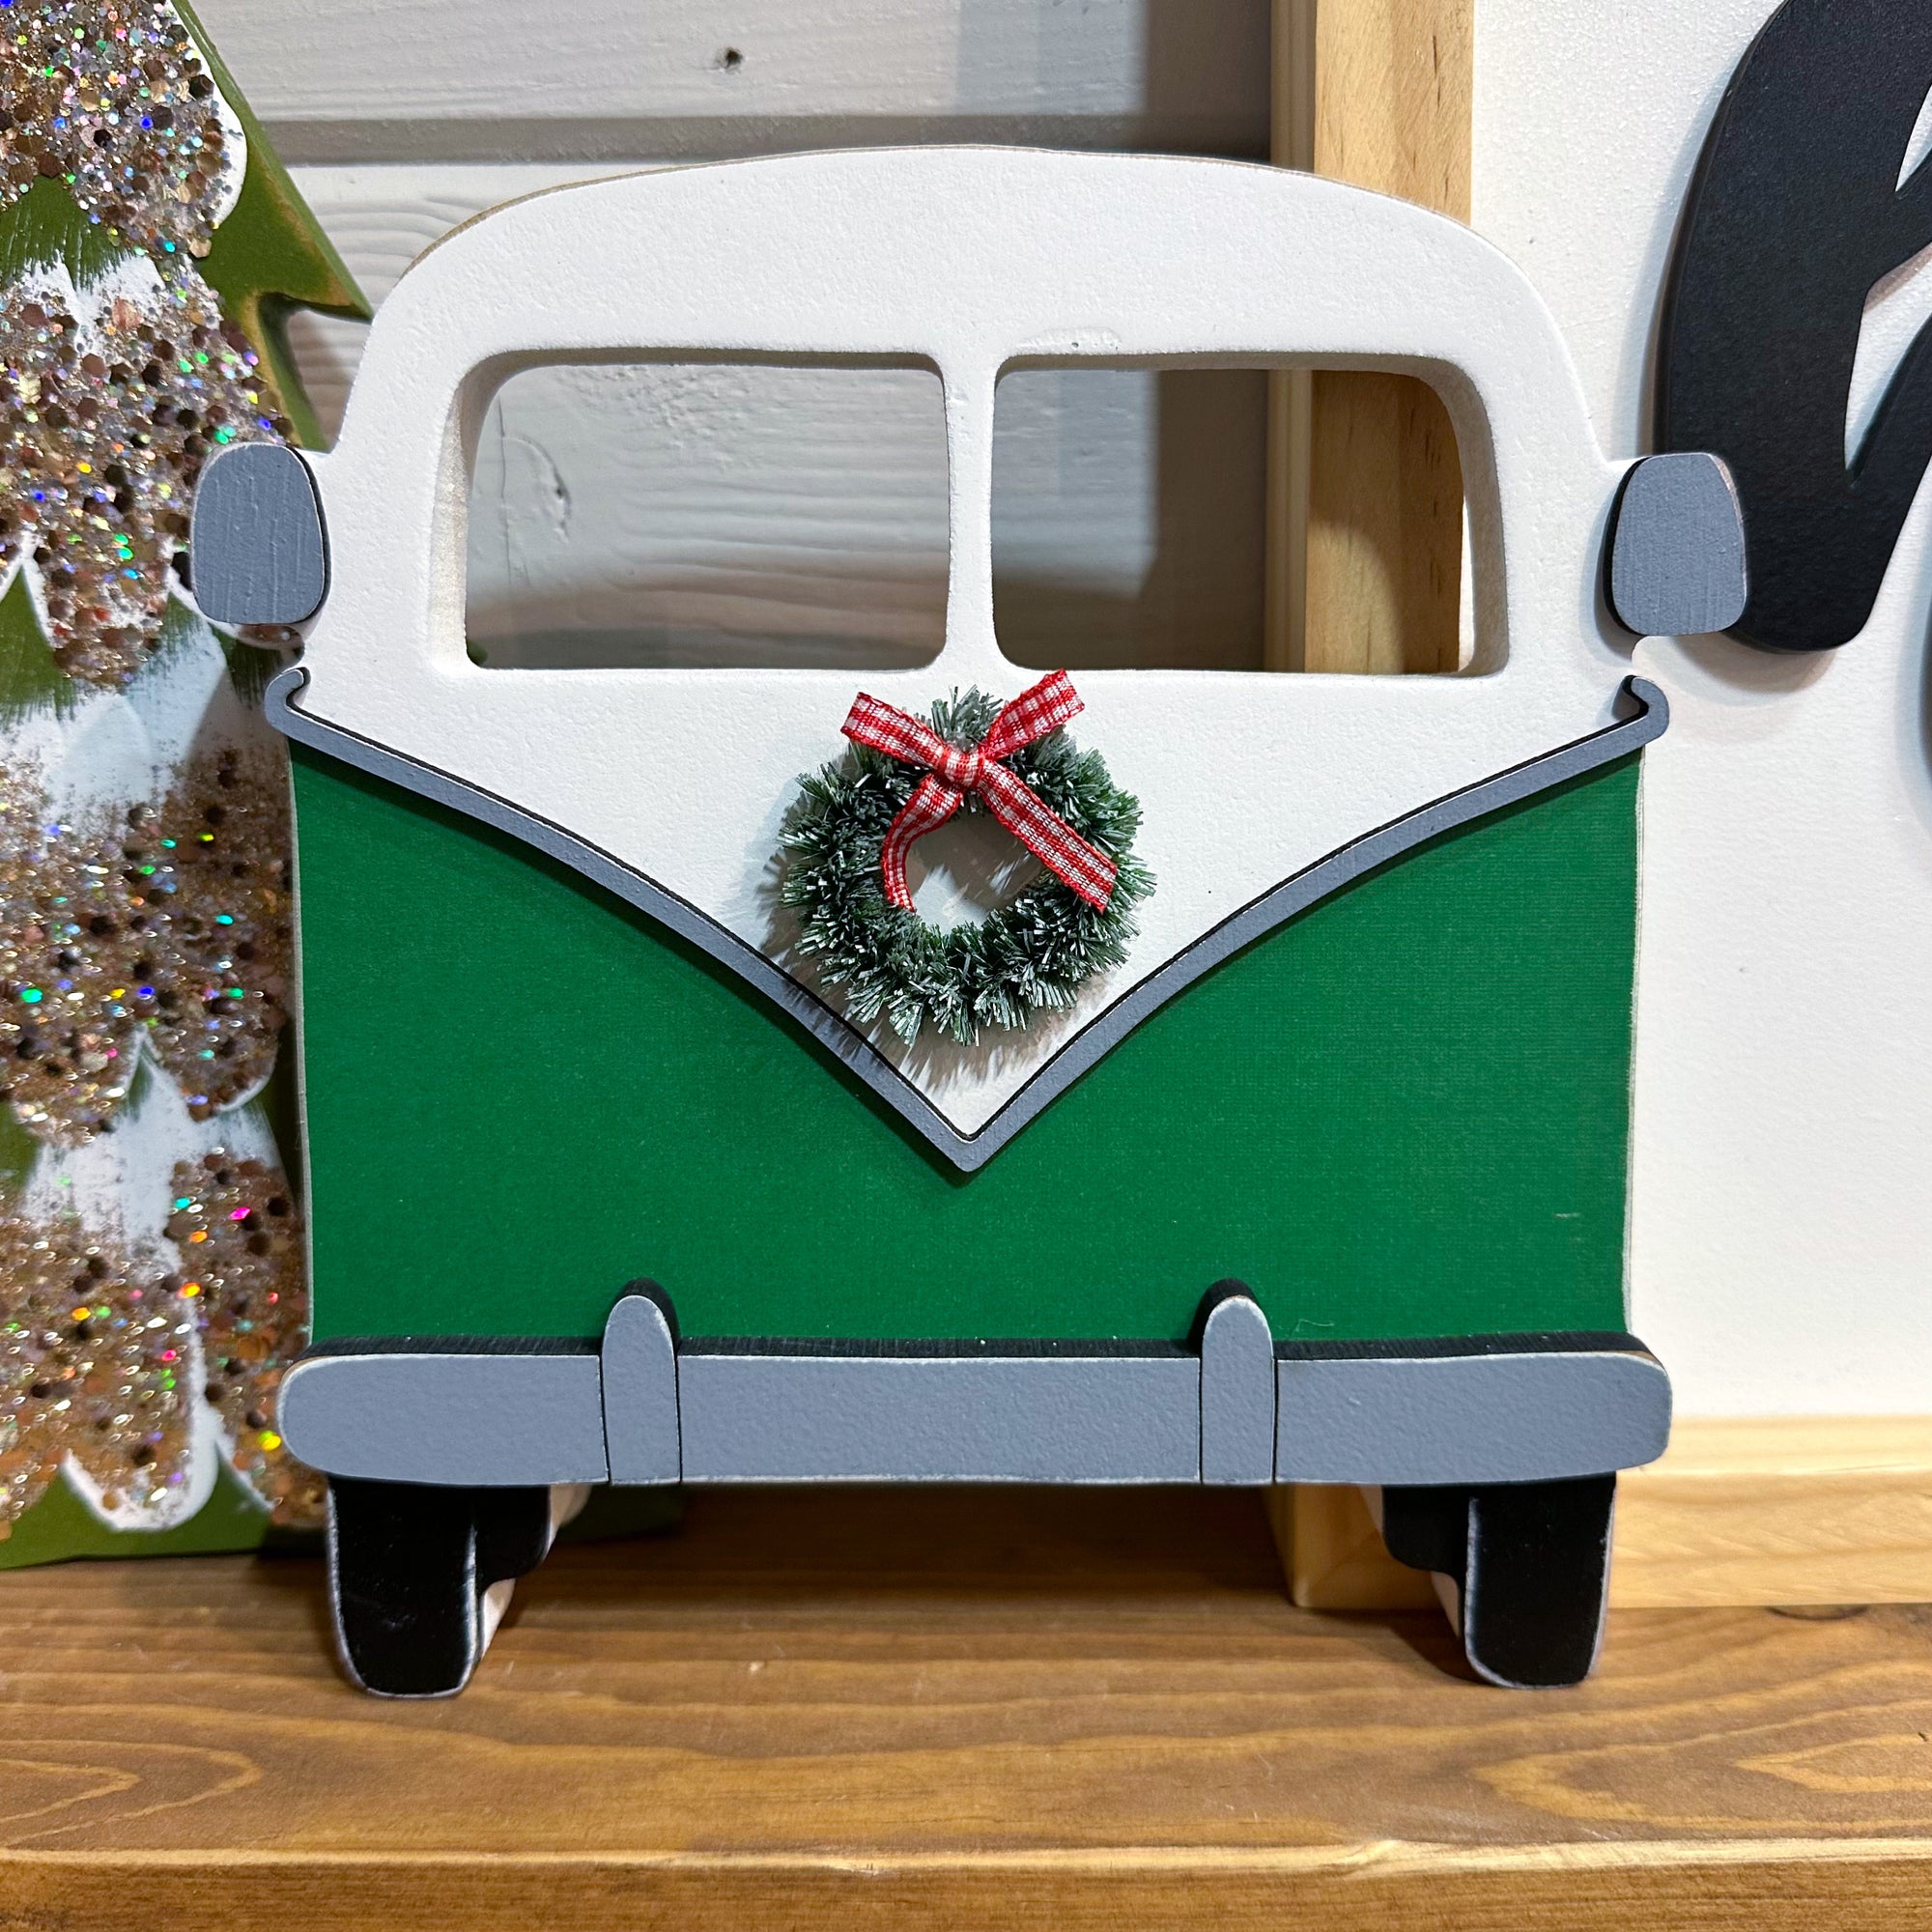 VW Bus- Holiday